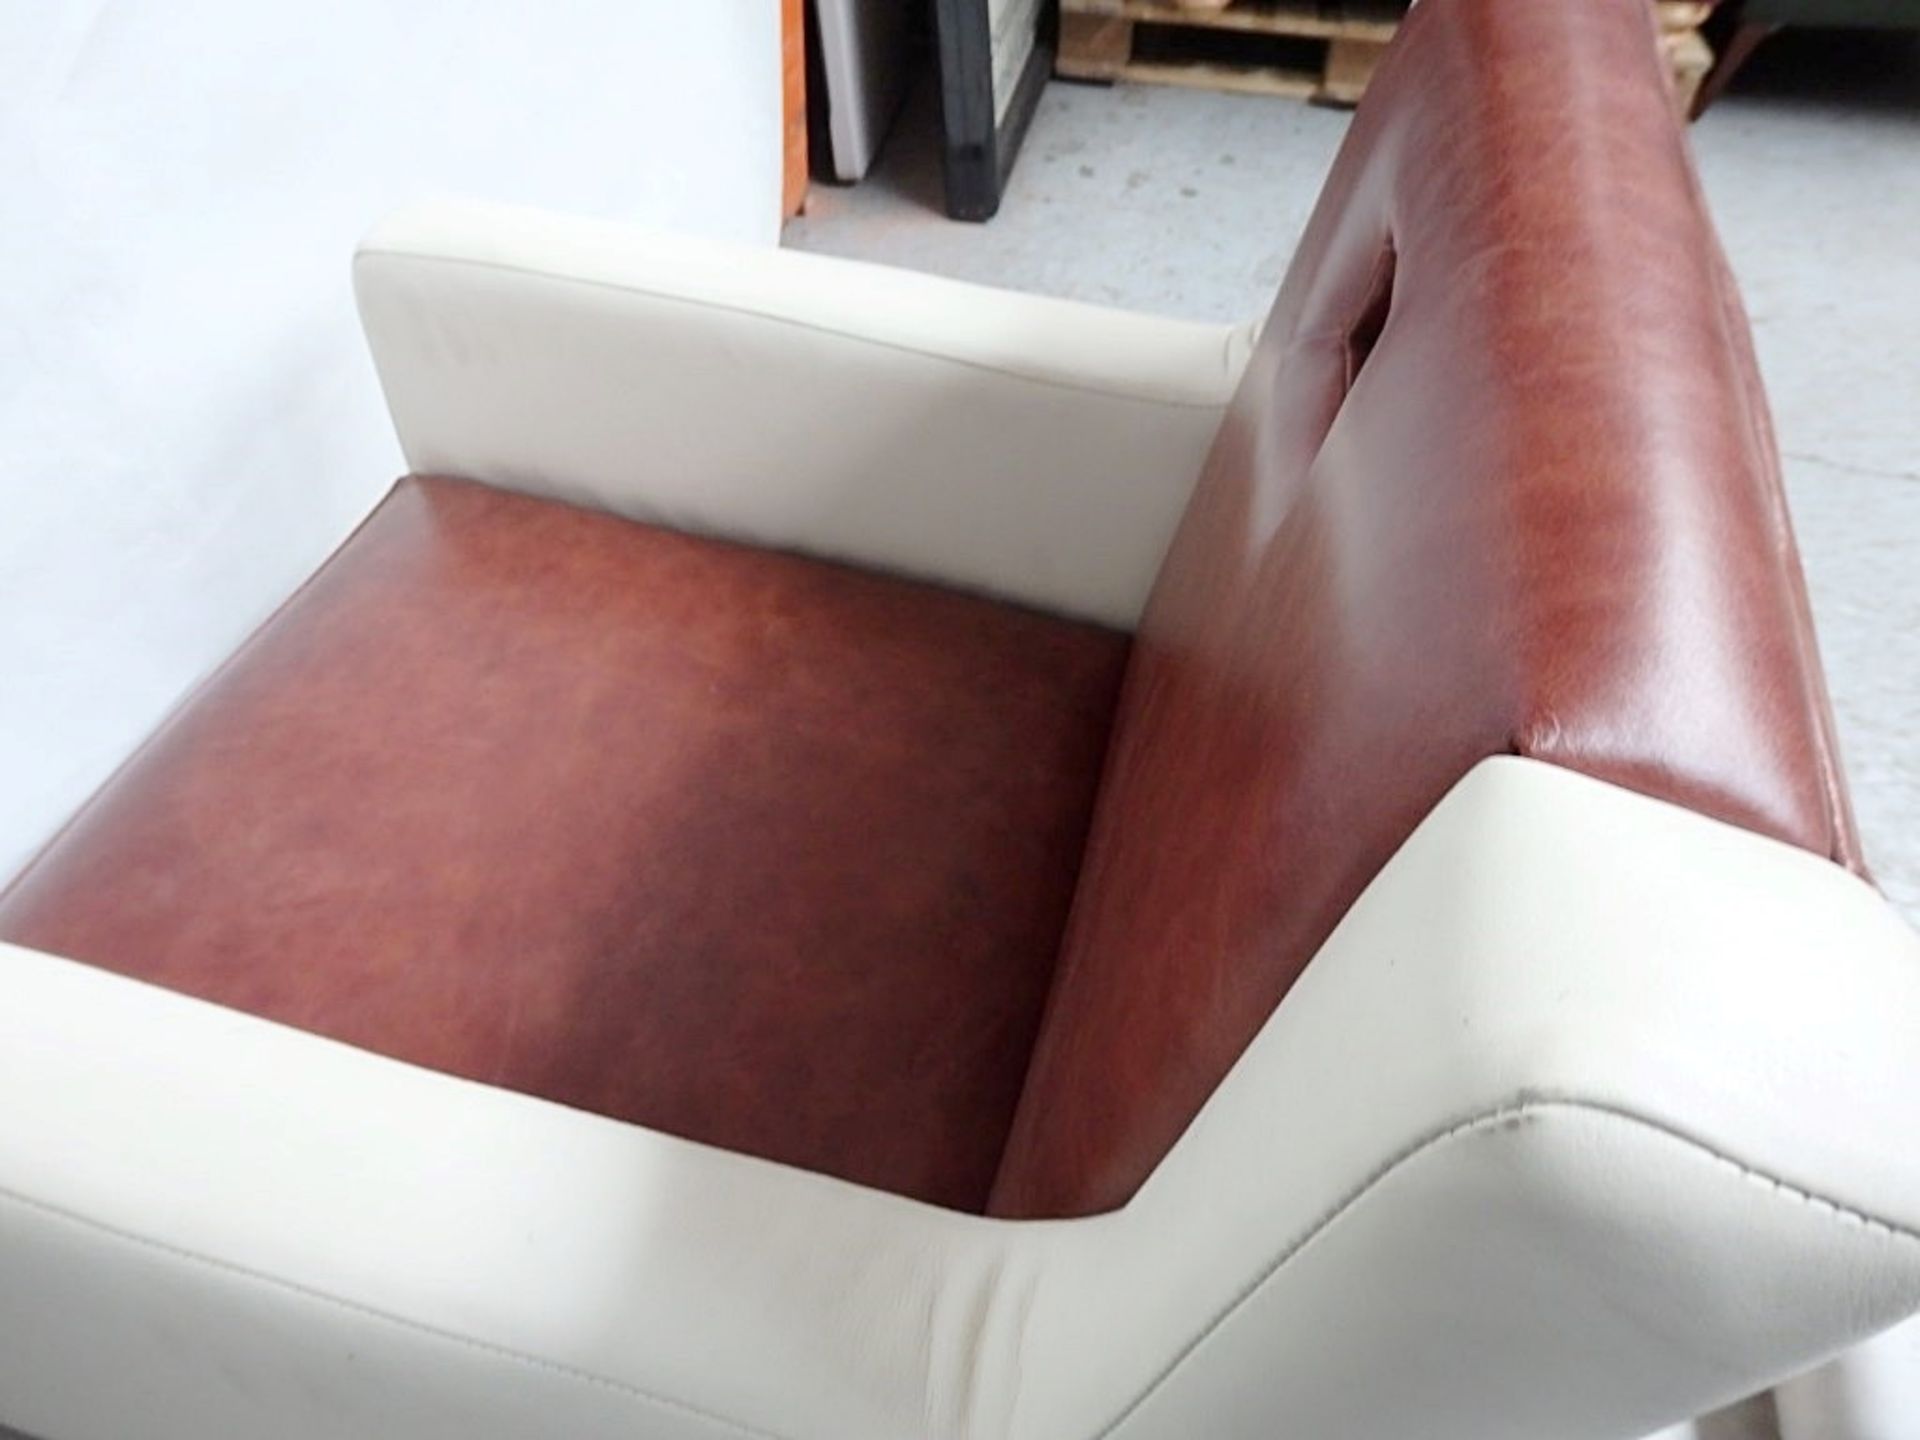 1 x Bespoke Armchair - Upholstered In Cream & Tan Leathers - Handcrafted & Upholstered By British - Image 6 of 8